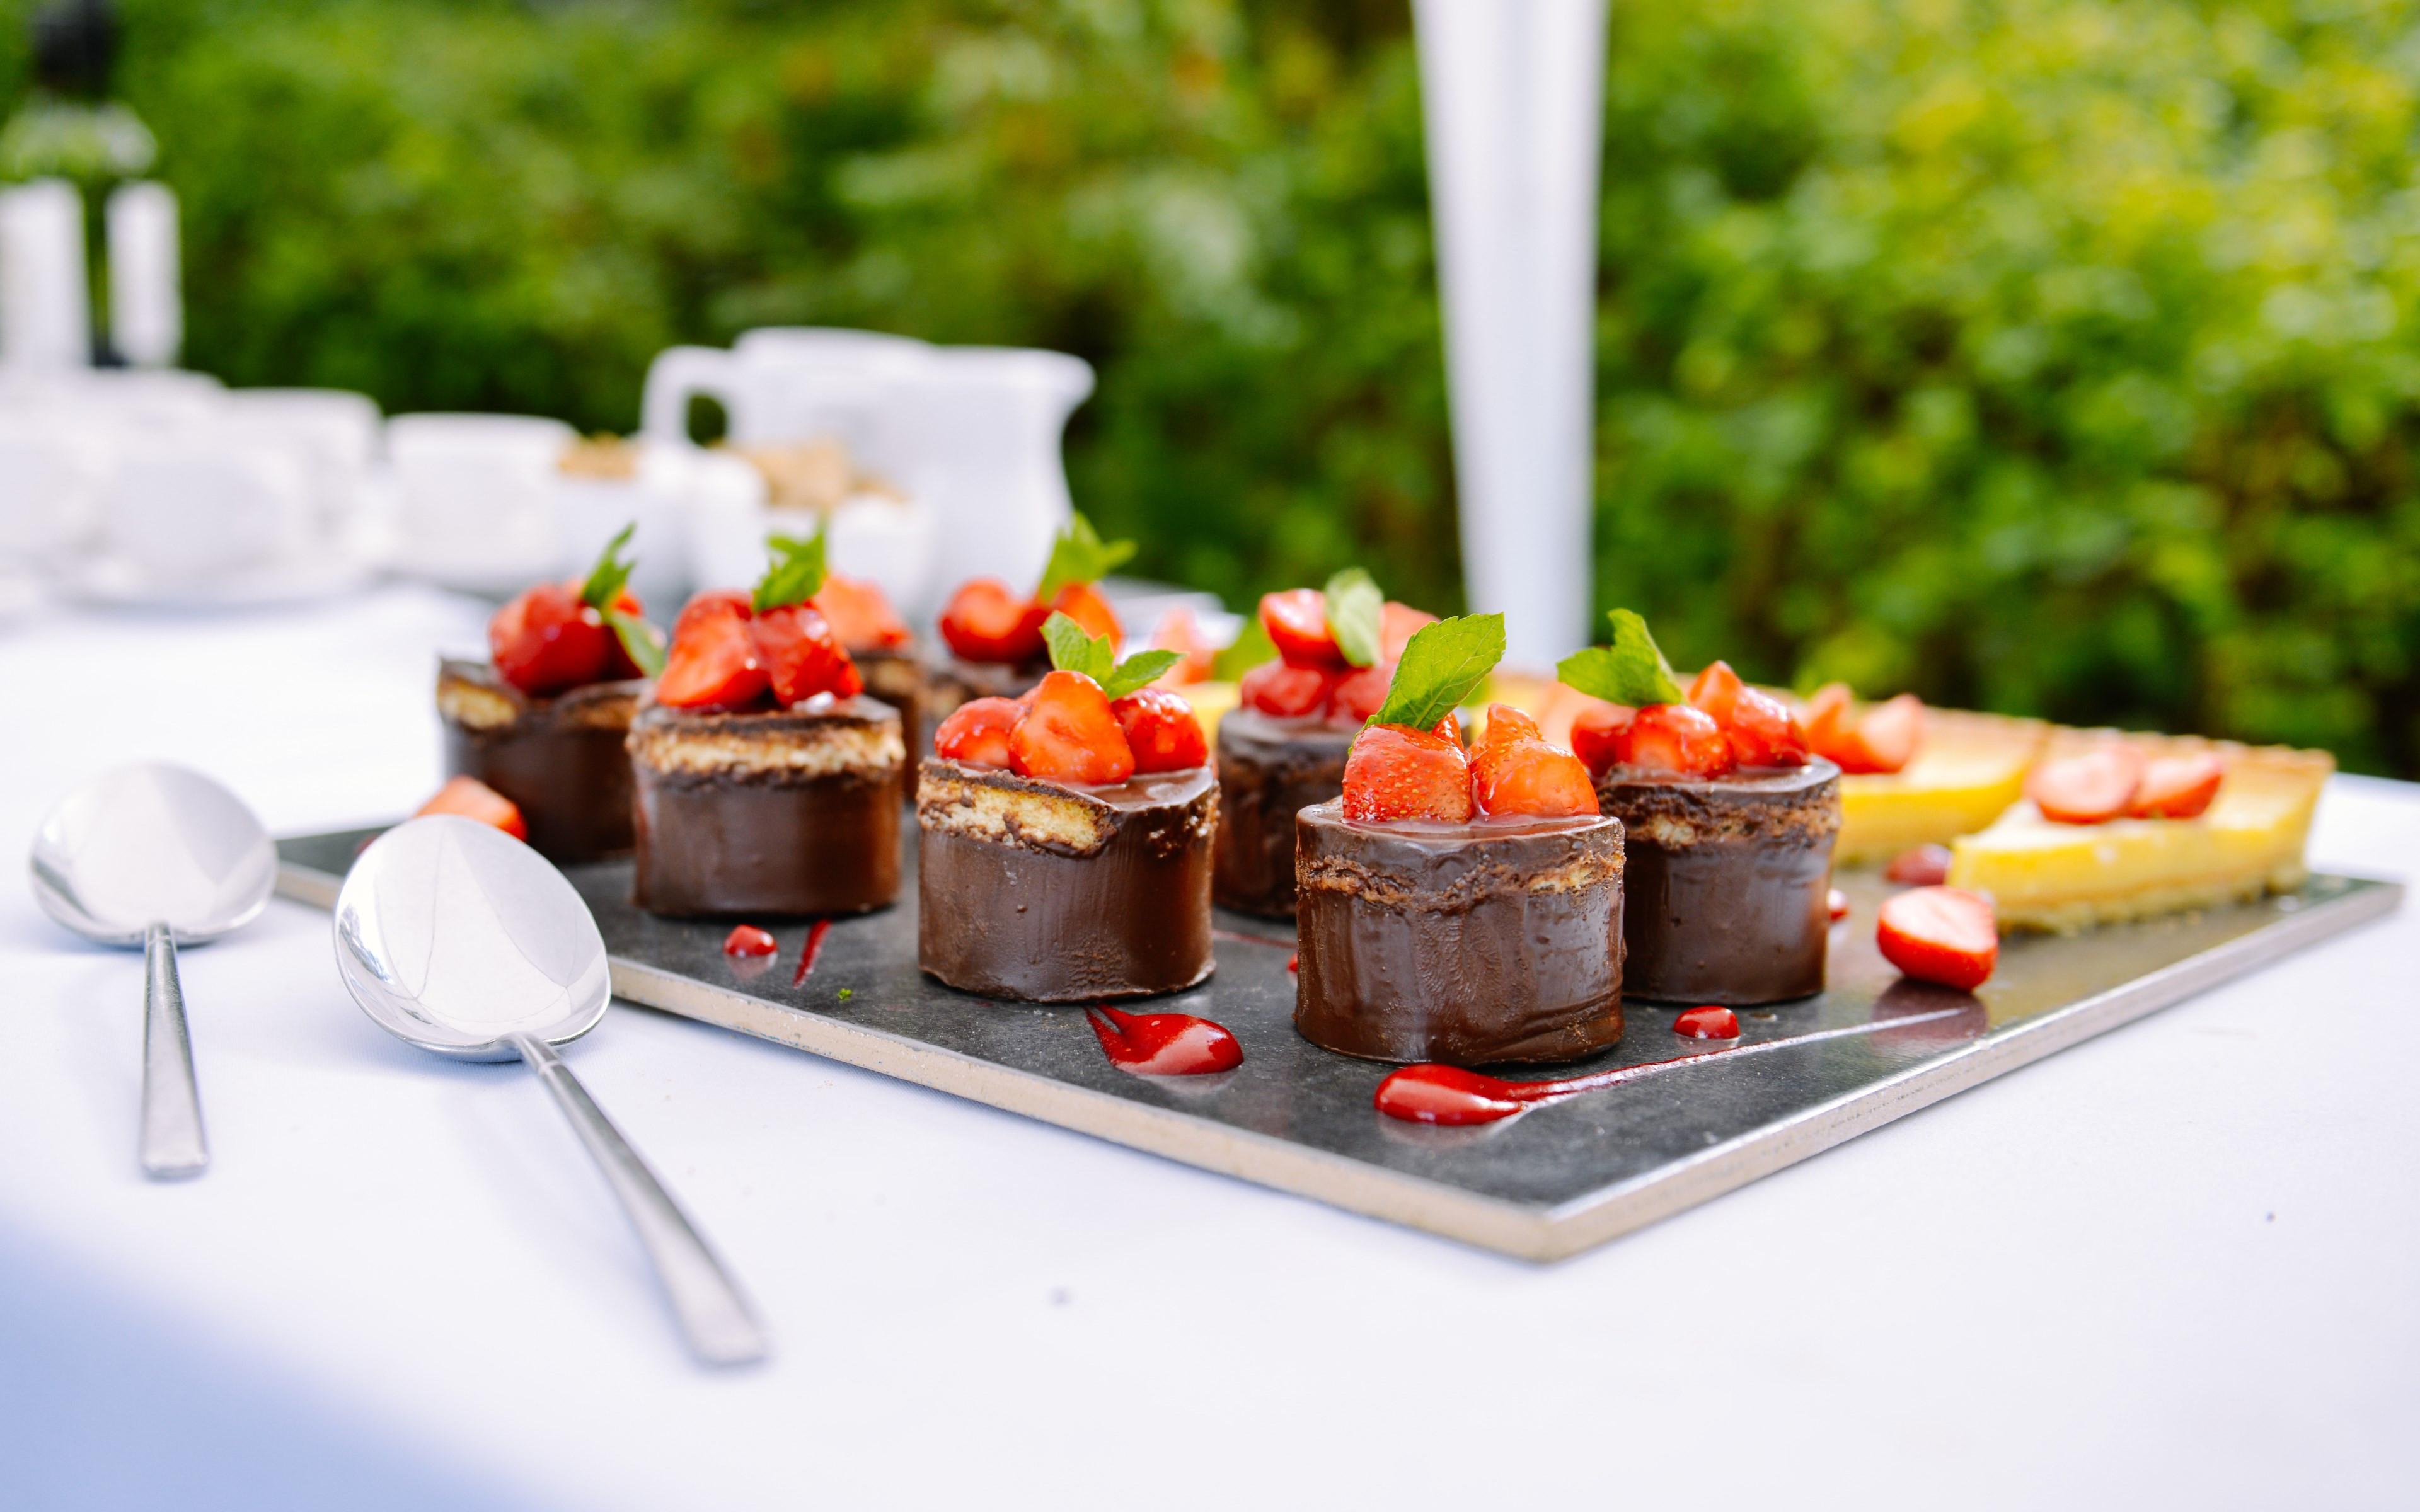 Chocolate cakes with strawberries wallpaper 3840x2400